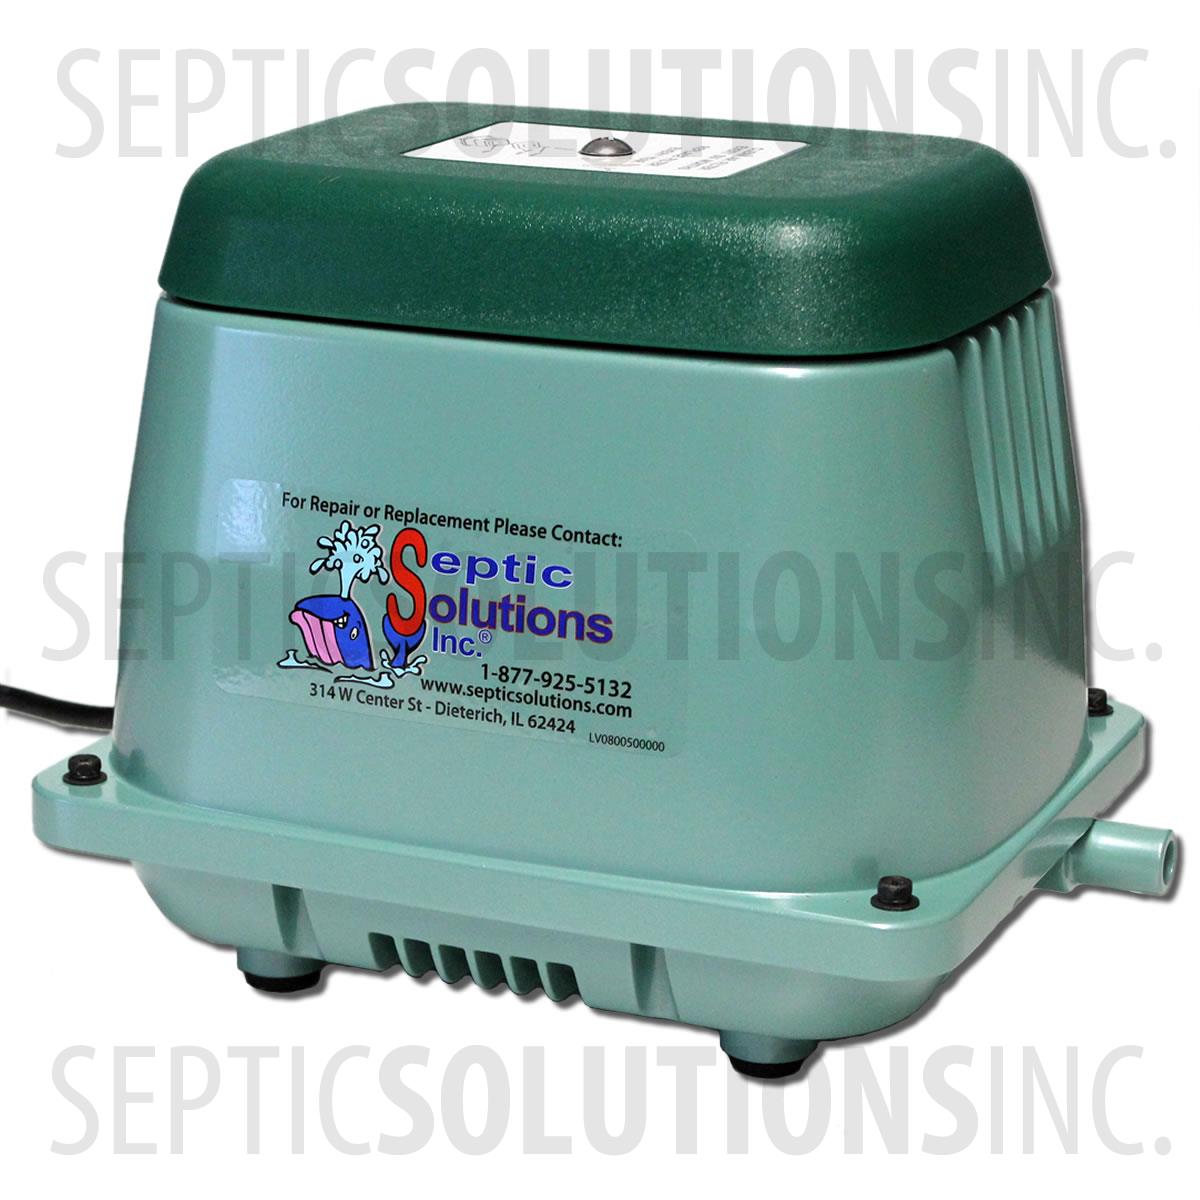 Details about   NEW Hiblow Small Fish Pond Septic Aeration Kits up to 24,000 GAL or 1/2 acre!! 